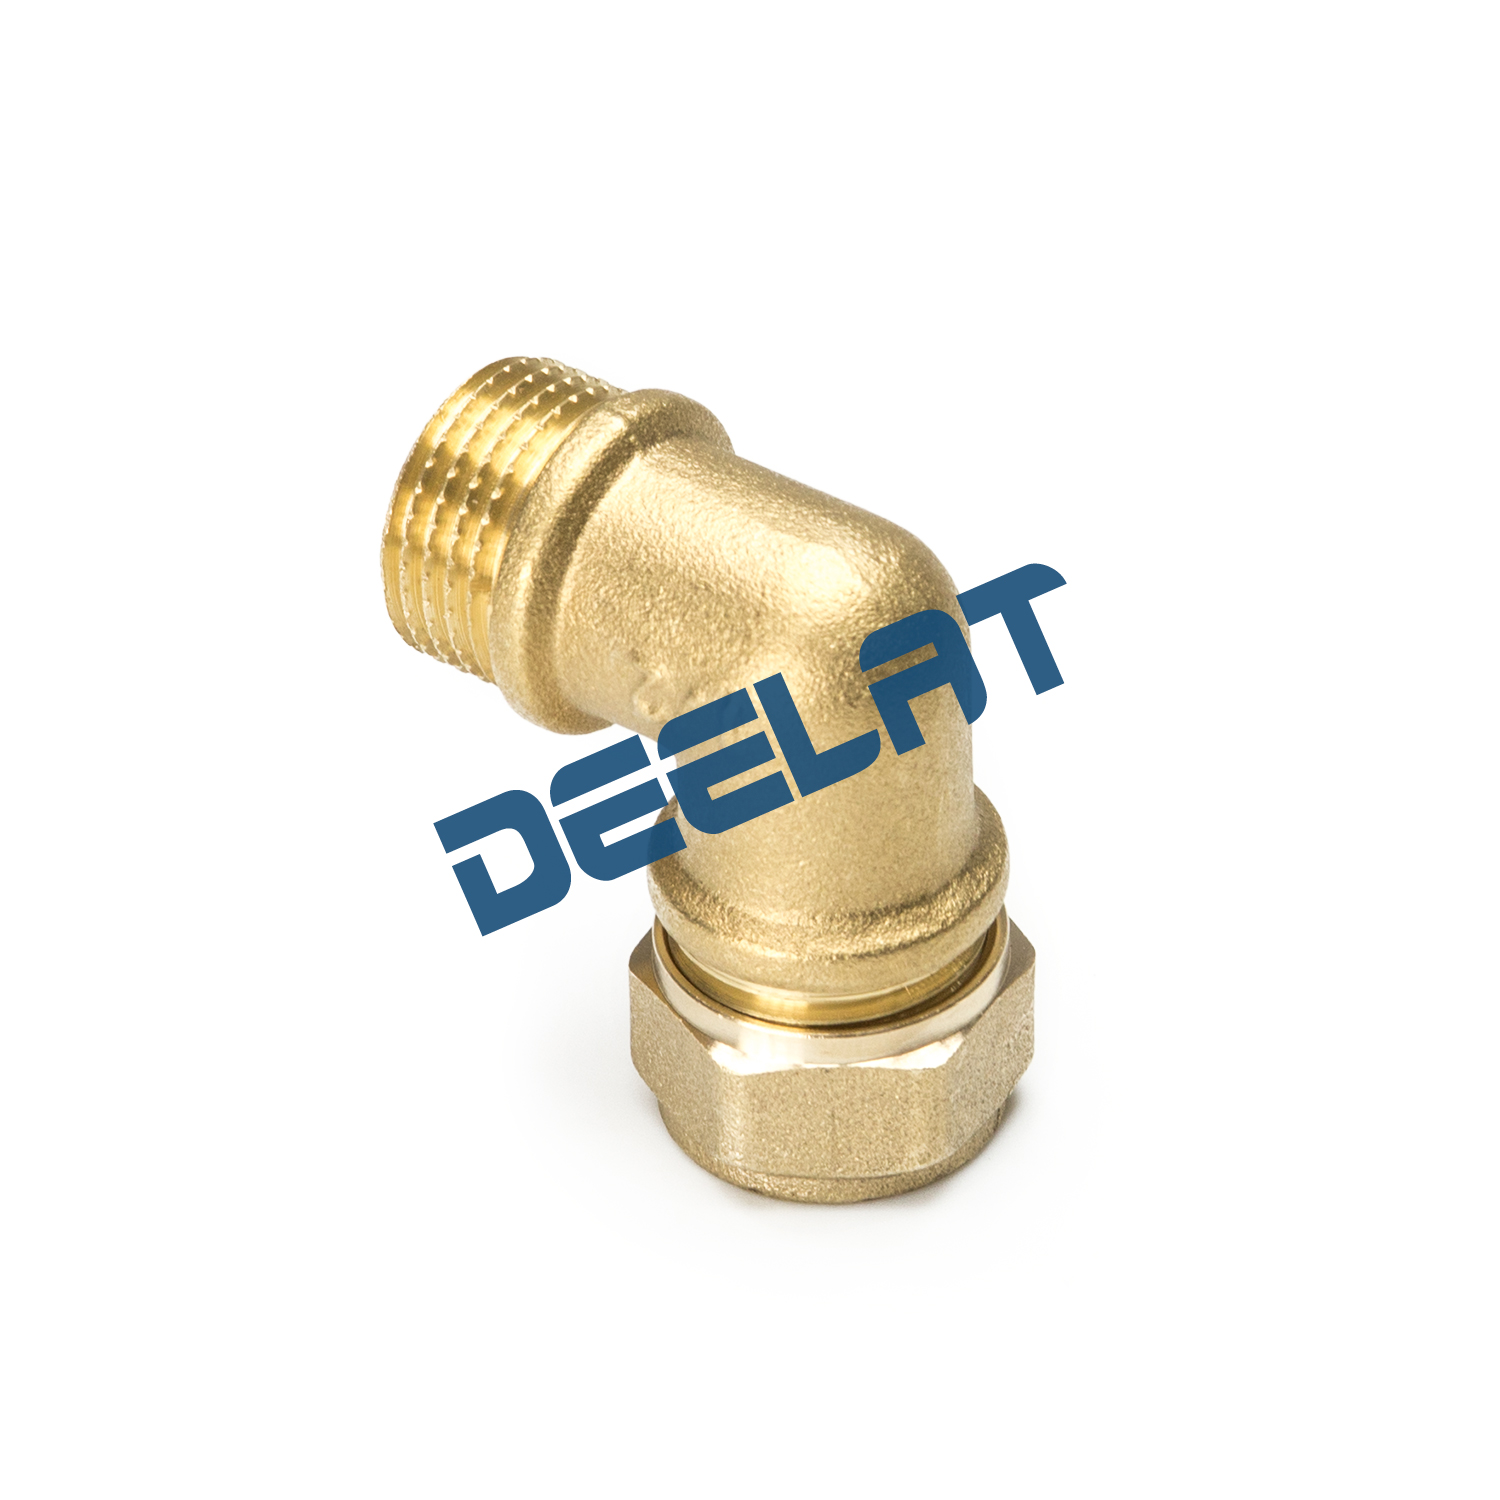 S 22MM 15MM BRASS COMPRESSION PLUMBING FITTING ELBOW SIZE